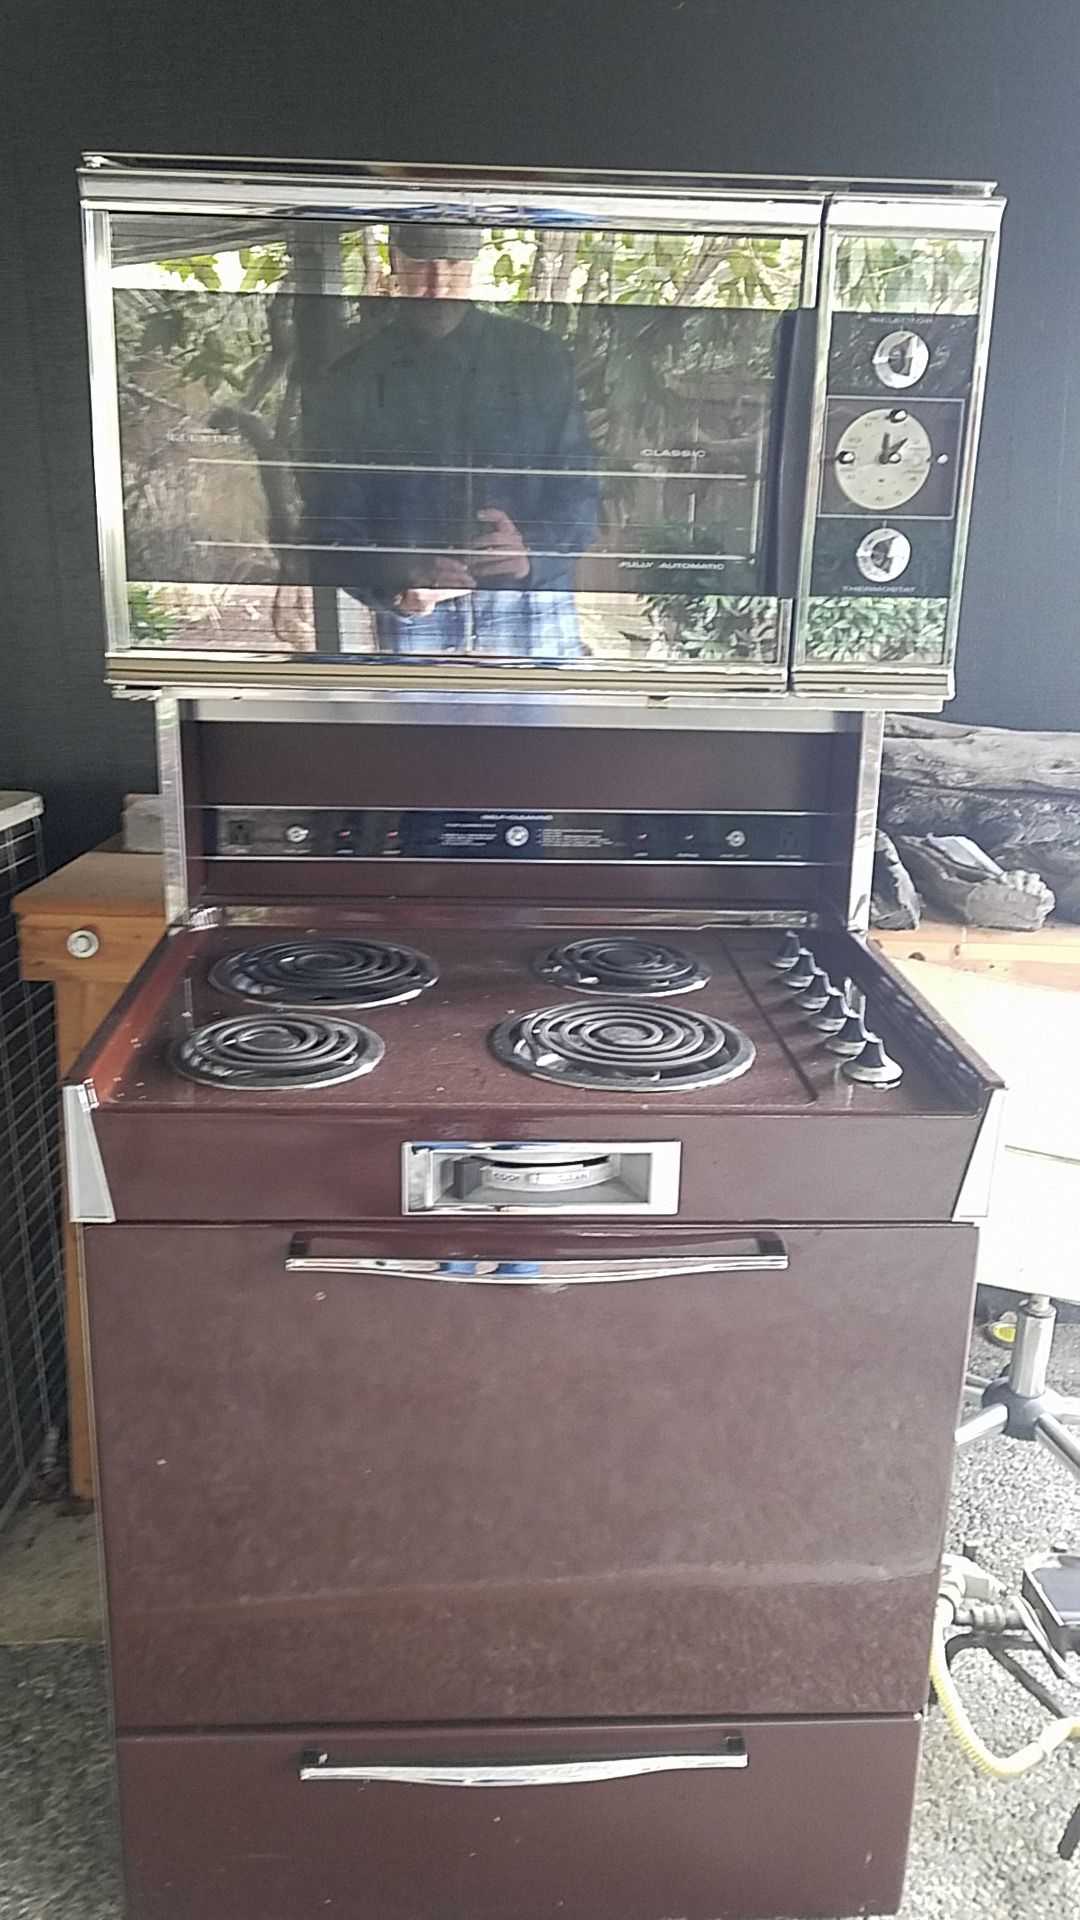 Classic Sears Kenmore double oven and stove